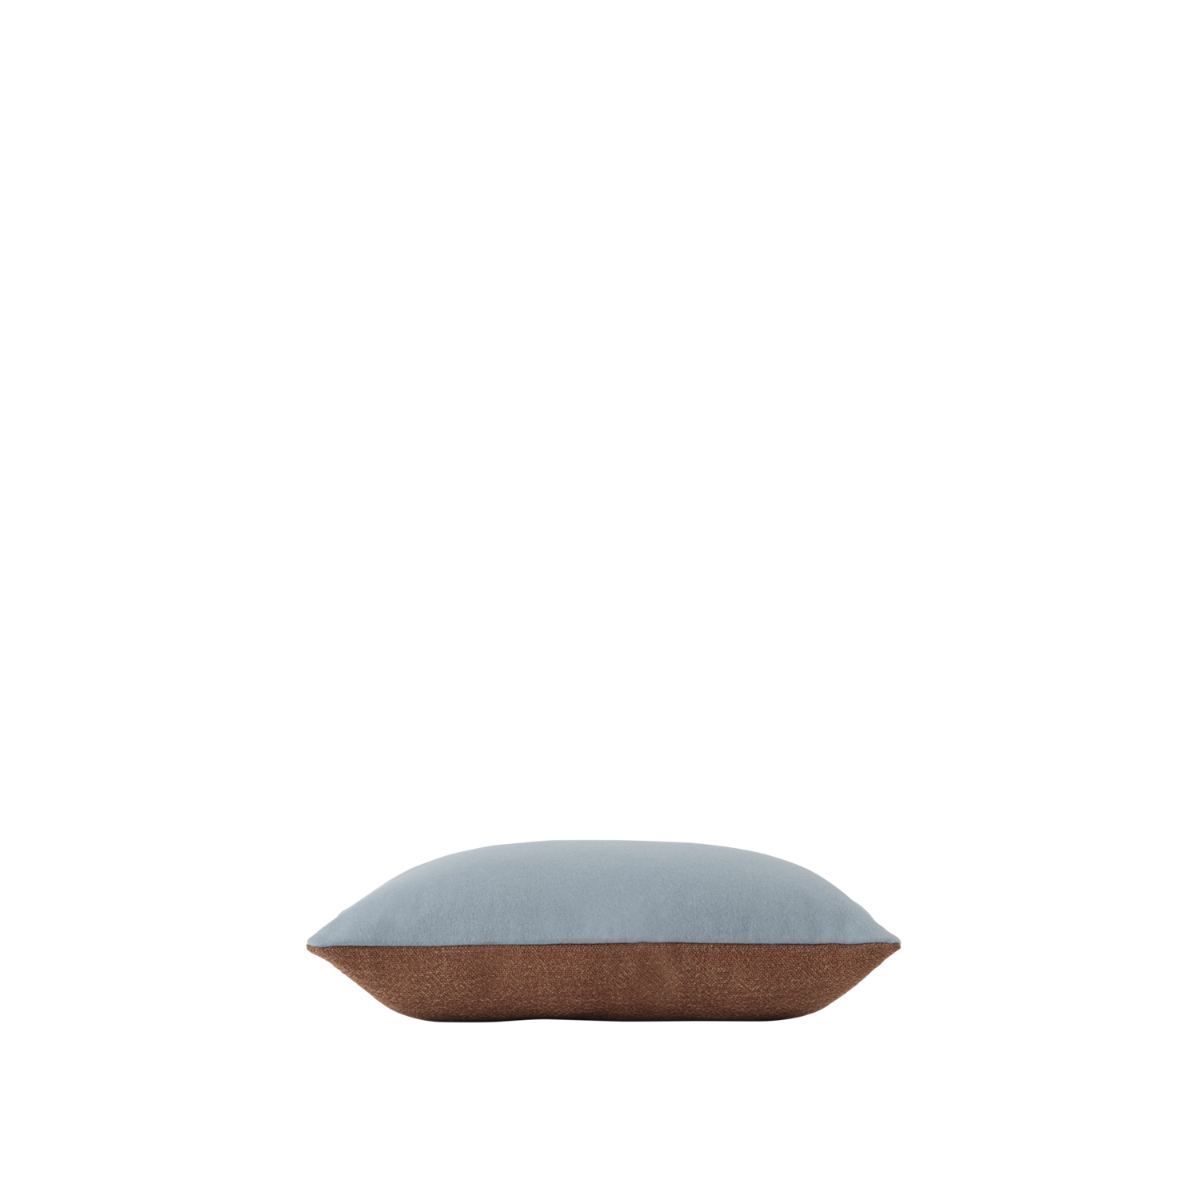 https://www.fundesign.nl/media/catalog/product/2/4/24286-en-mingle-cushion-copper-brown-light-blue-angle-muuto-5000x5000-hi-res.png